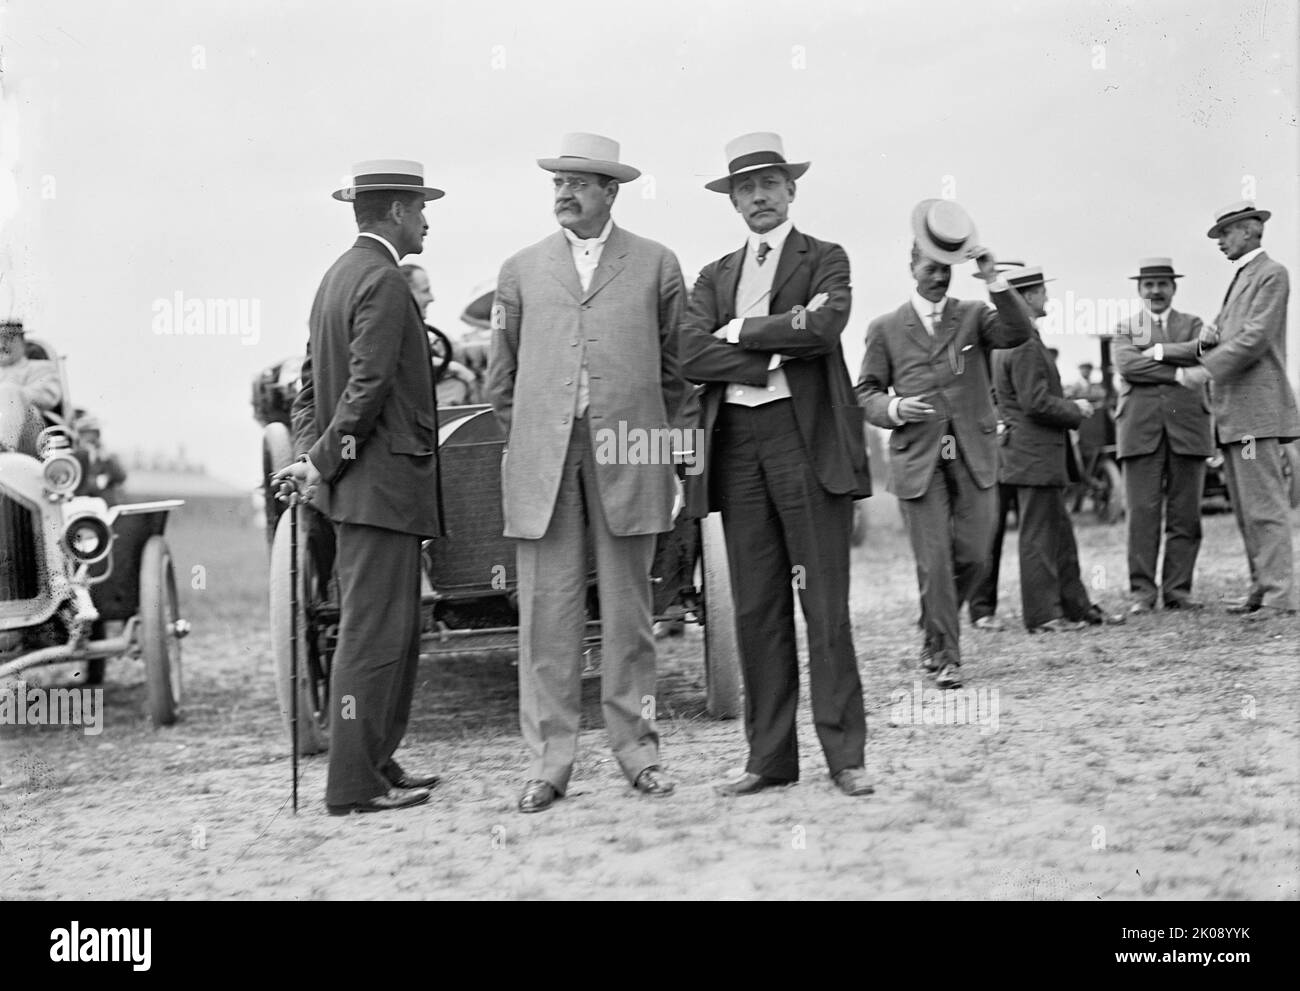 Wright Flights, Fort Myer, Virginia, July 1909 - Spectators: Robert Bacon; Sec. of War Dickinson; Sen. Elihu Root. [The Wright brothers conducted test flights at Fort Myer after the U.S. War Department offered them a $25,000 contract if their Flyer reached a speed of 40 miles per hour]. Stock Photo